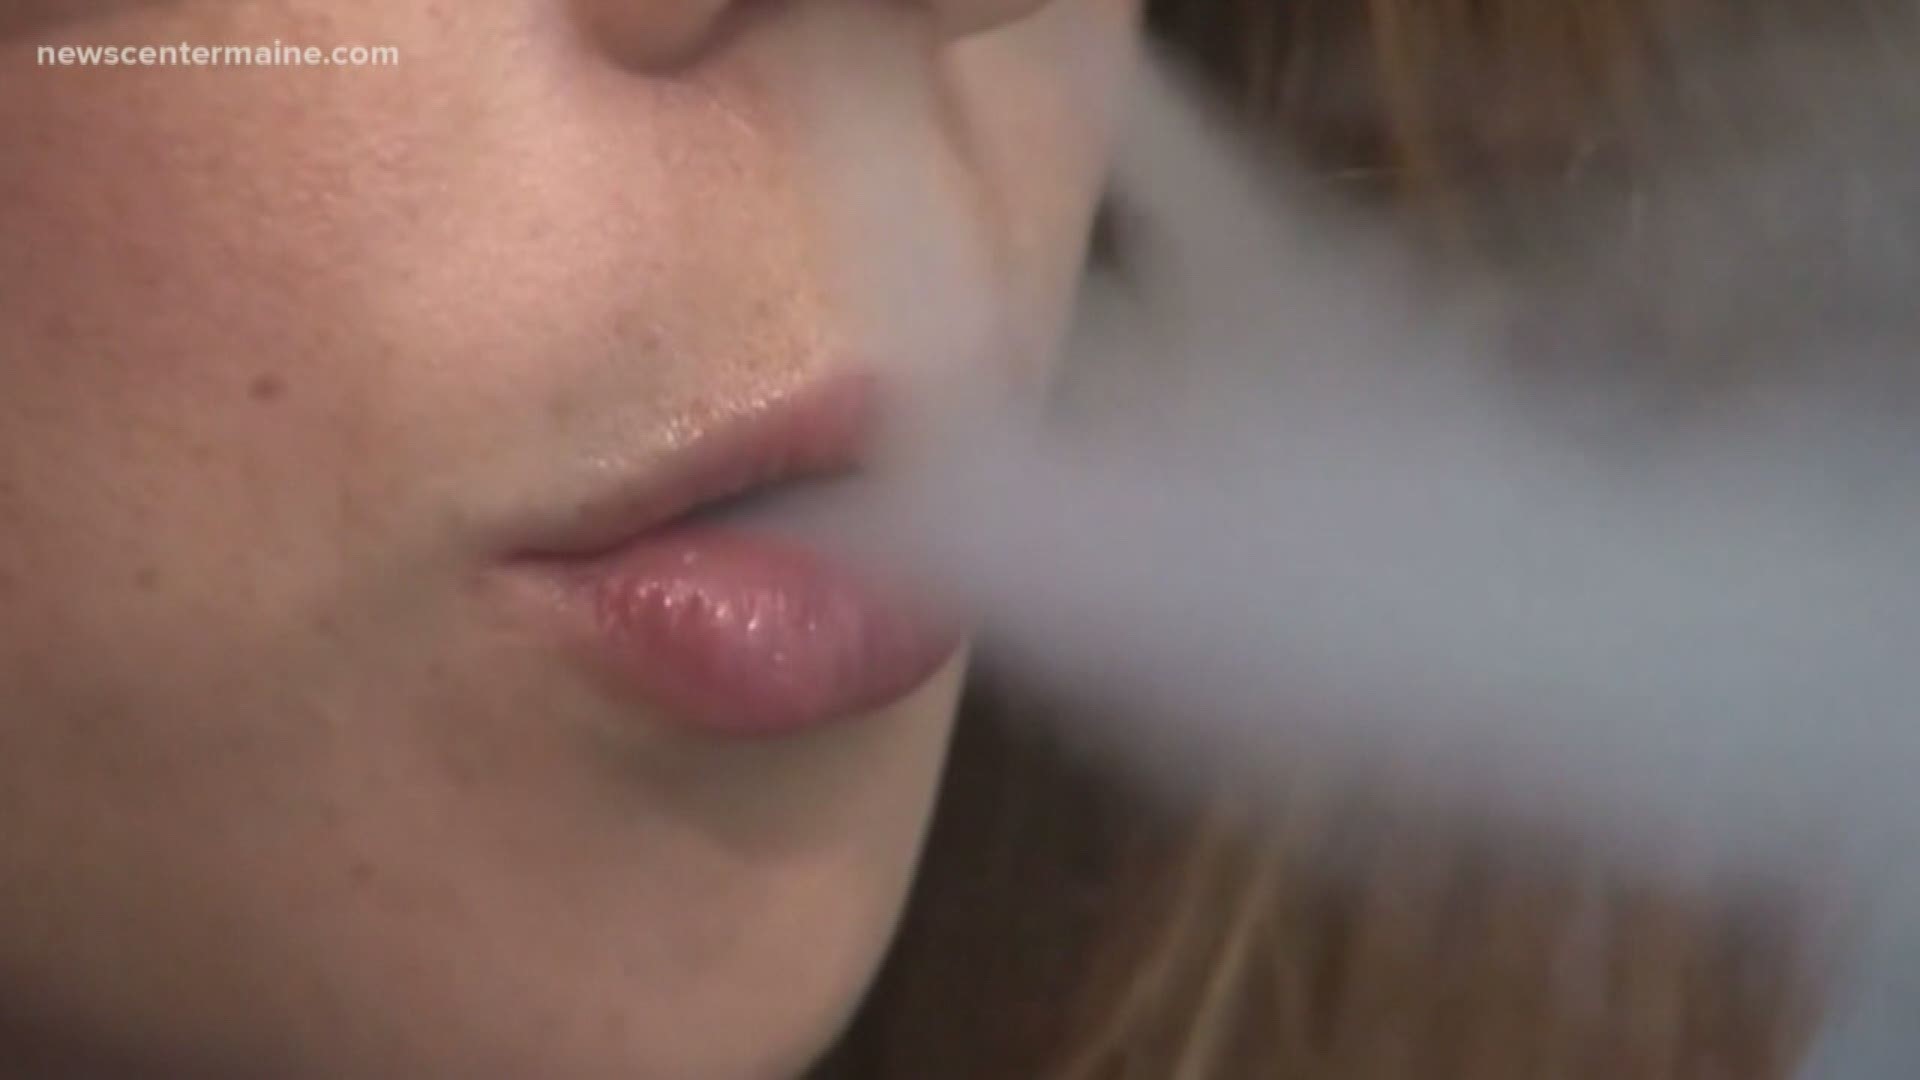 Lawmakers consider ban on e-cigarettes and cartridges